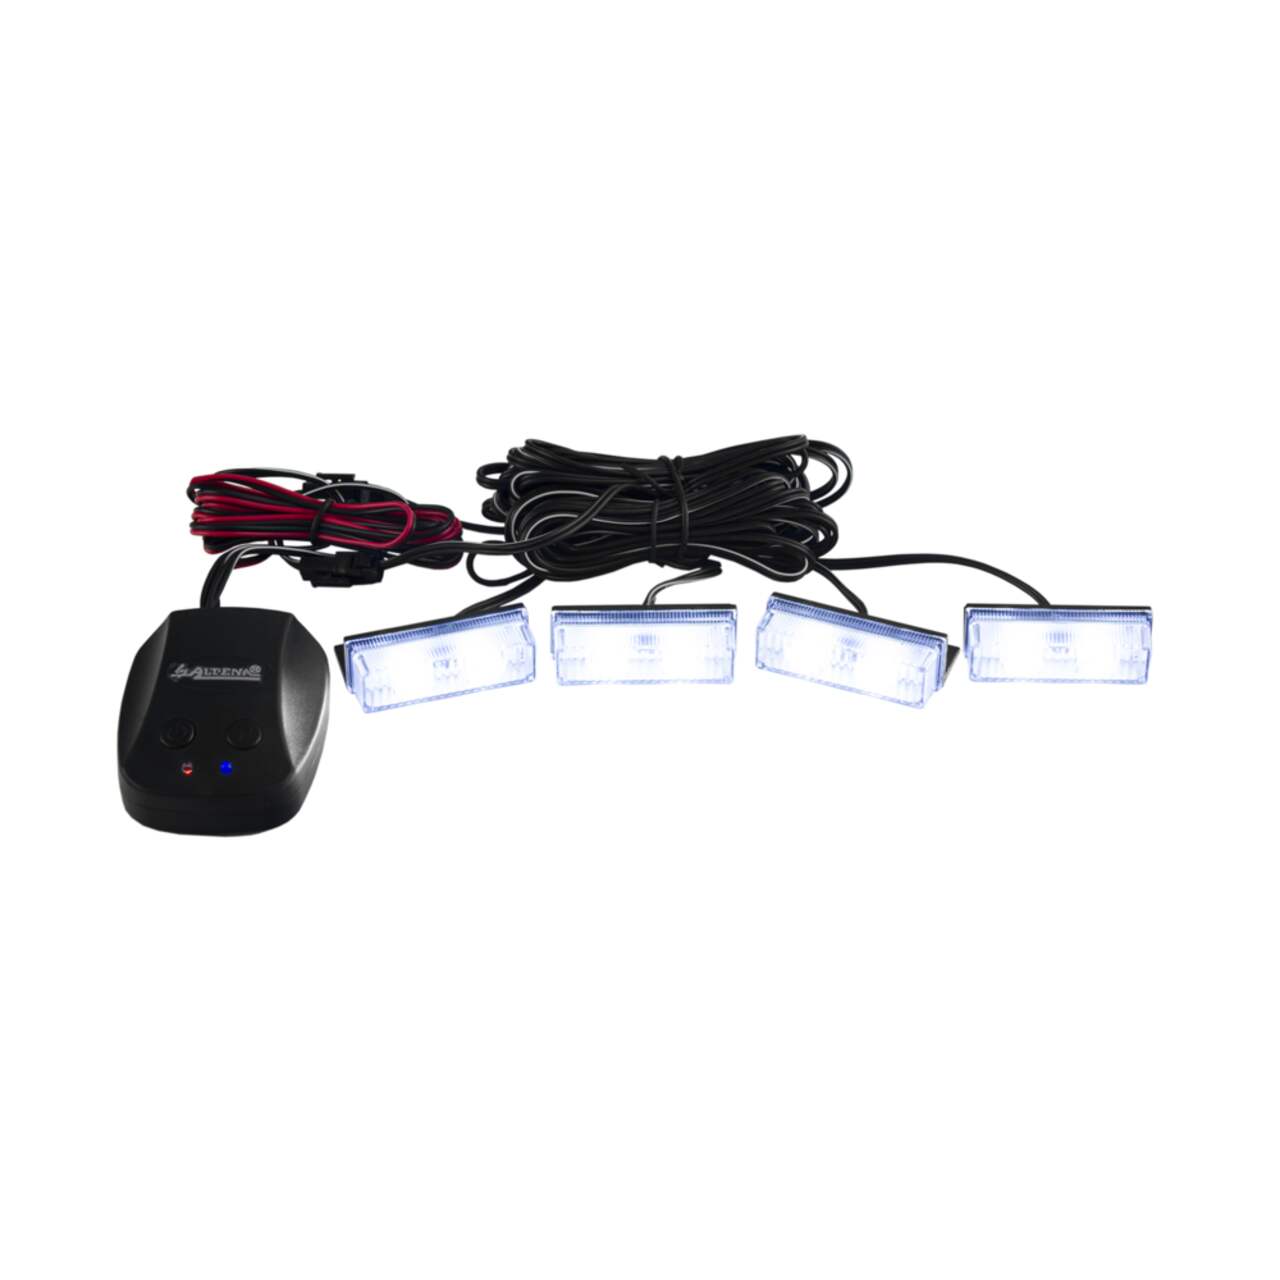 B-switcher buy now, price start from US $10.79